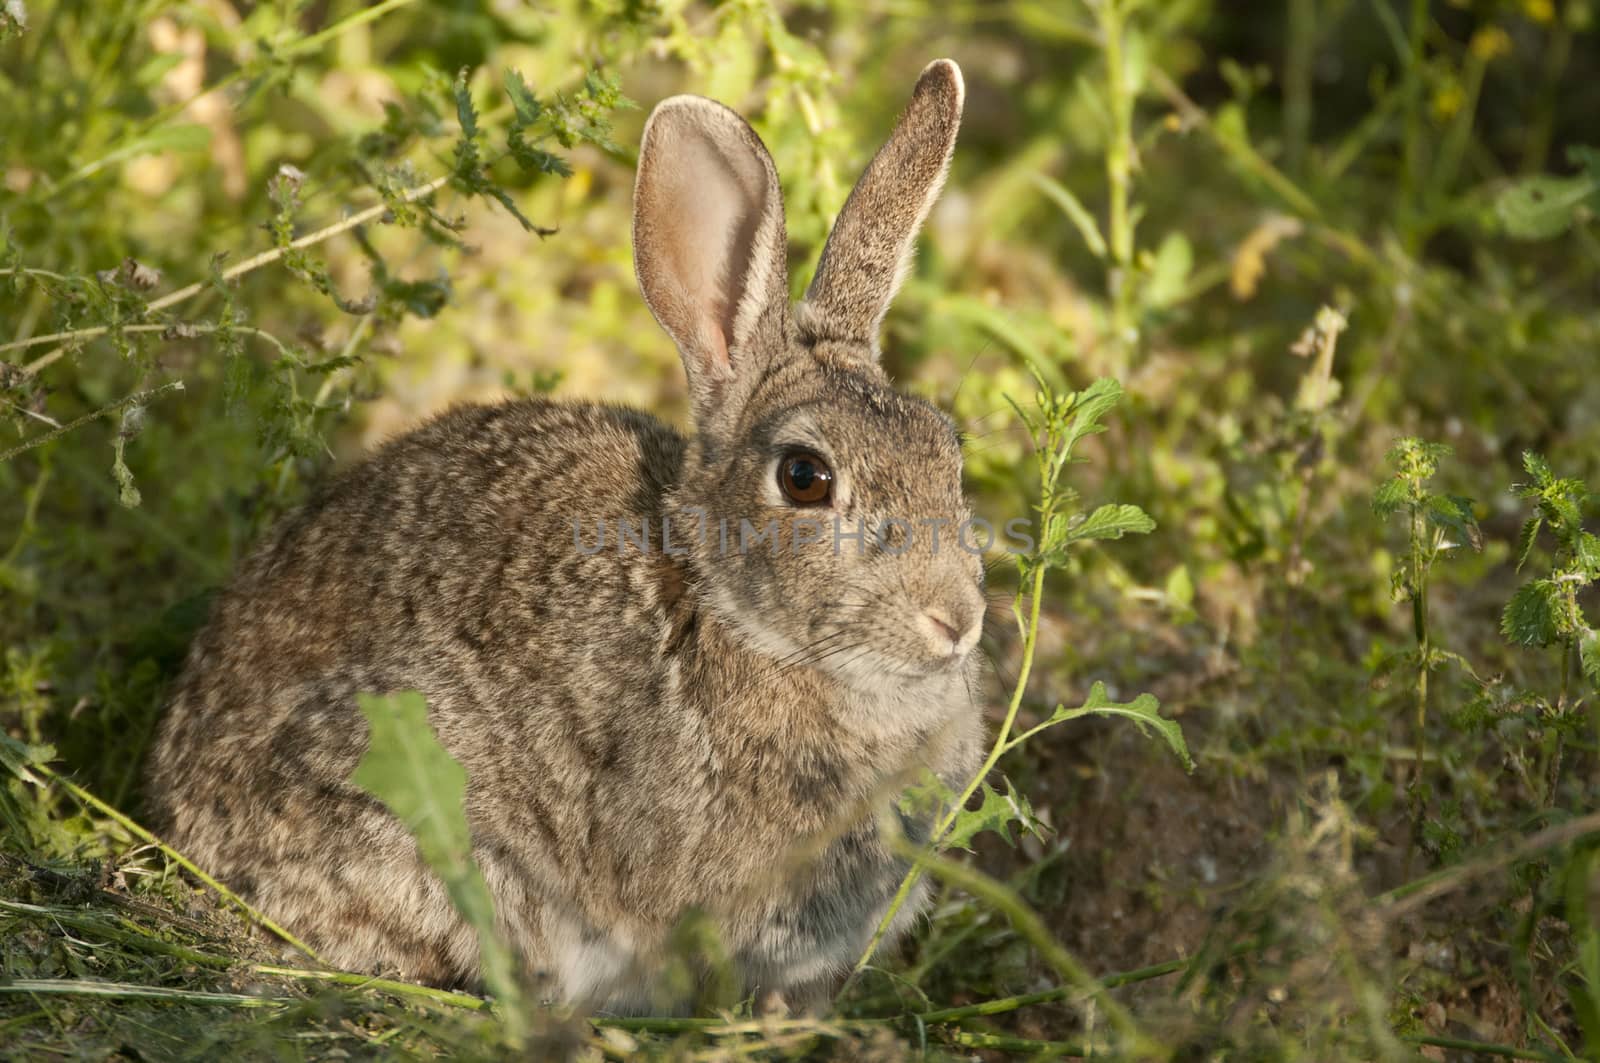 Rabbit portrait in the natural habitat, life in the meadow. Euro by jalonsohu@gmail.com